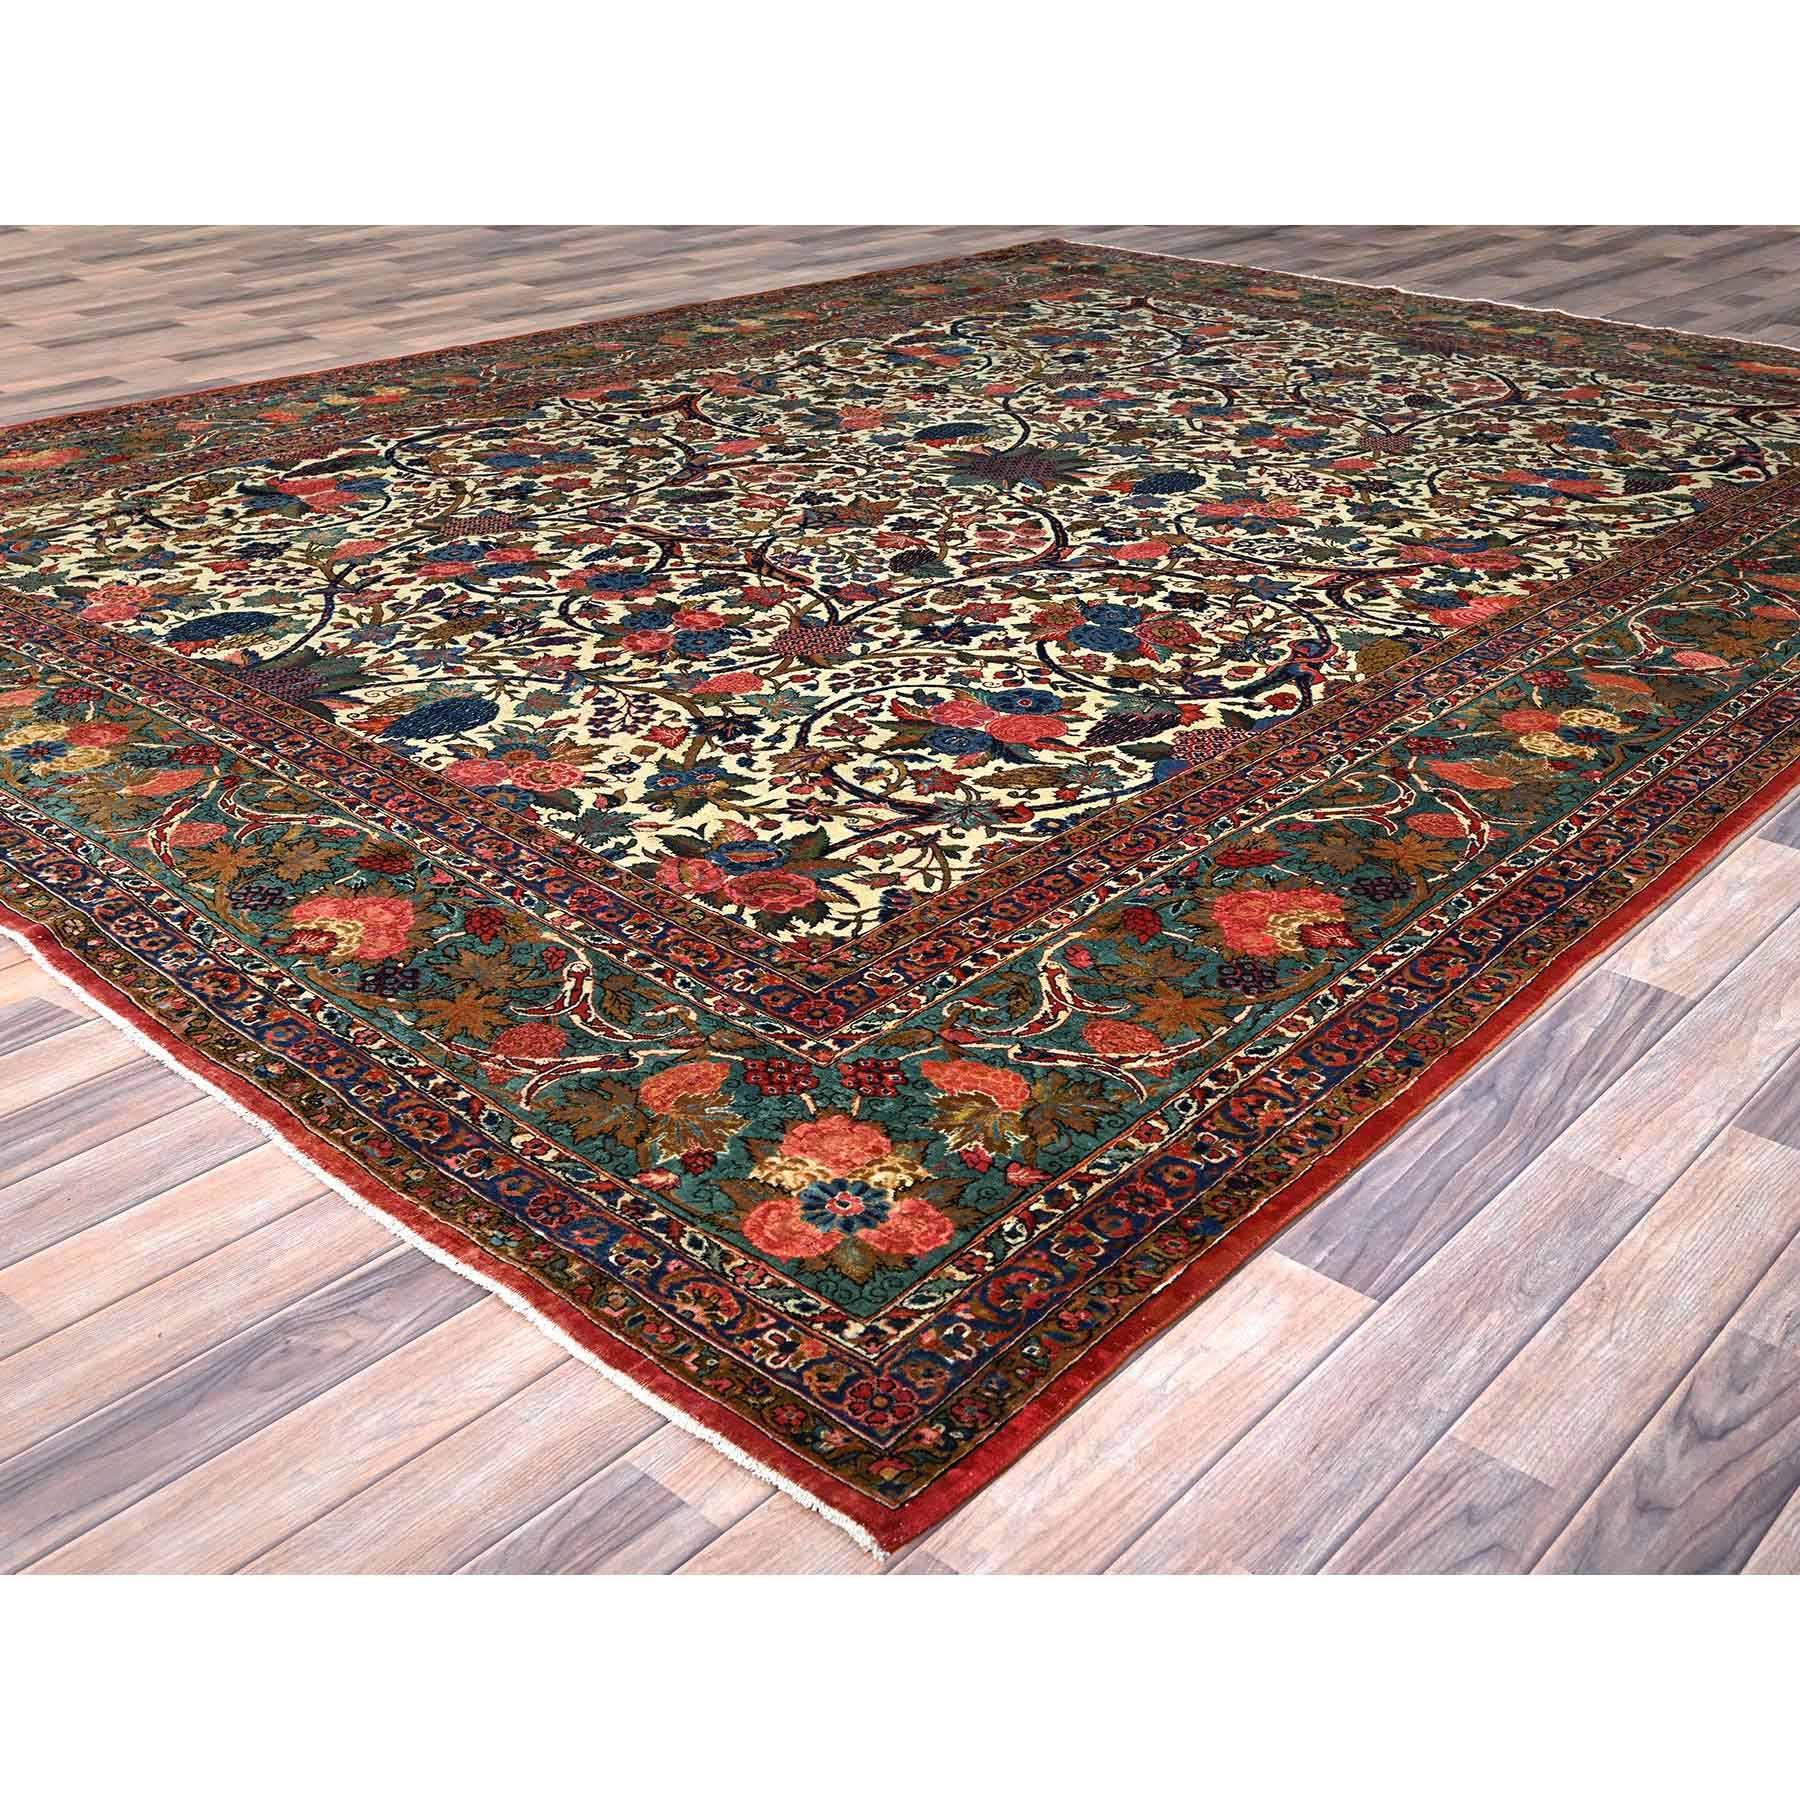 Antique-Hand-Knotted-Rug-1065